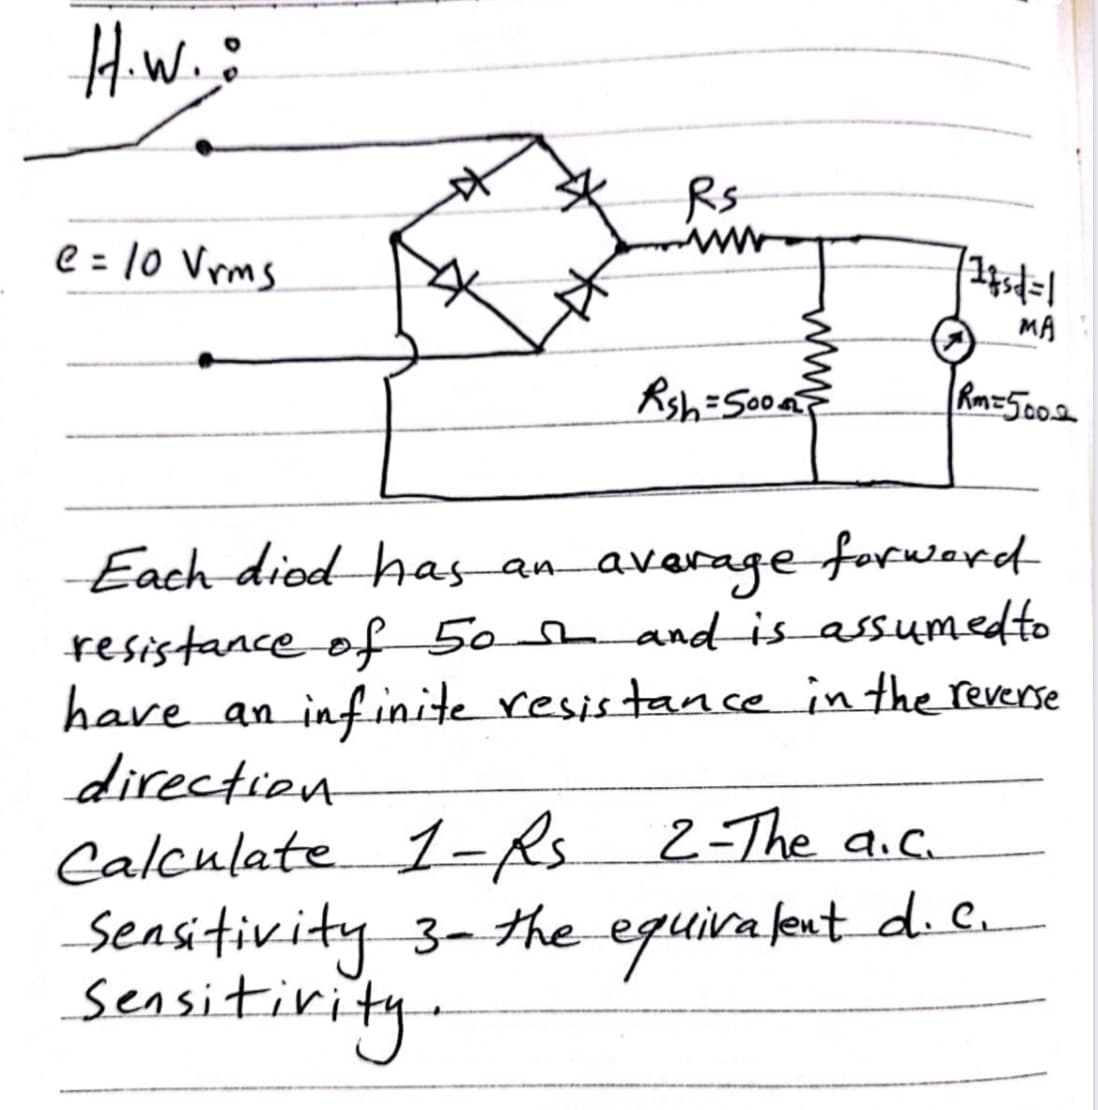 H.W.:
Rs
14sd=1
e = 10 Vrms
MA
Rsh=500
Rm=5002
Each diod has an average forward
resistance of 50 and is assumed to
have an infinite resistance in the reverse
direction
Calculate 1-Rs
2-The a.c.
Sensitivity 3- the equivalent d. C.
Sensitivity.